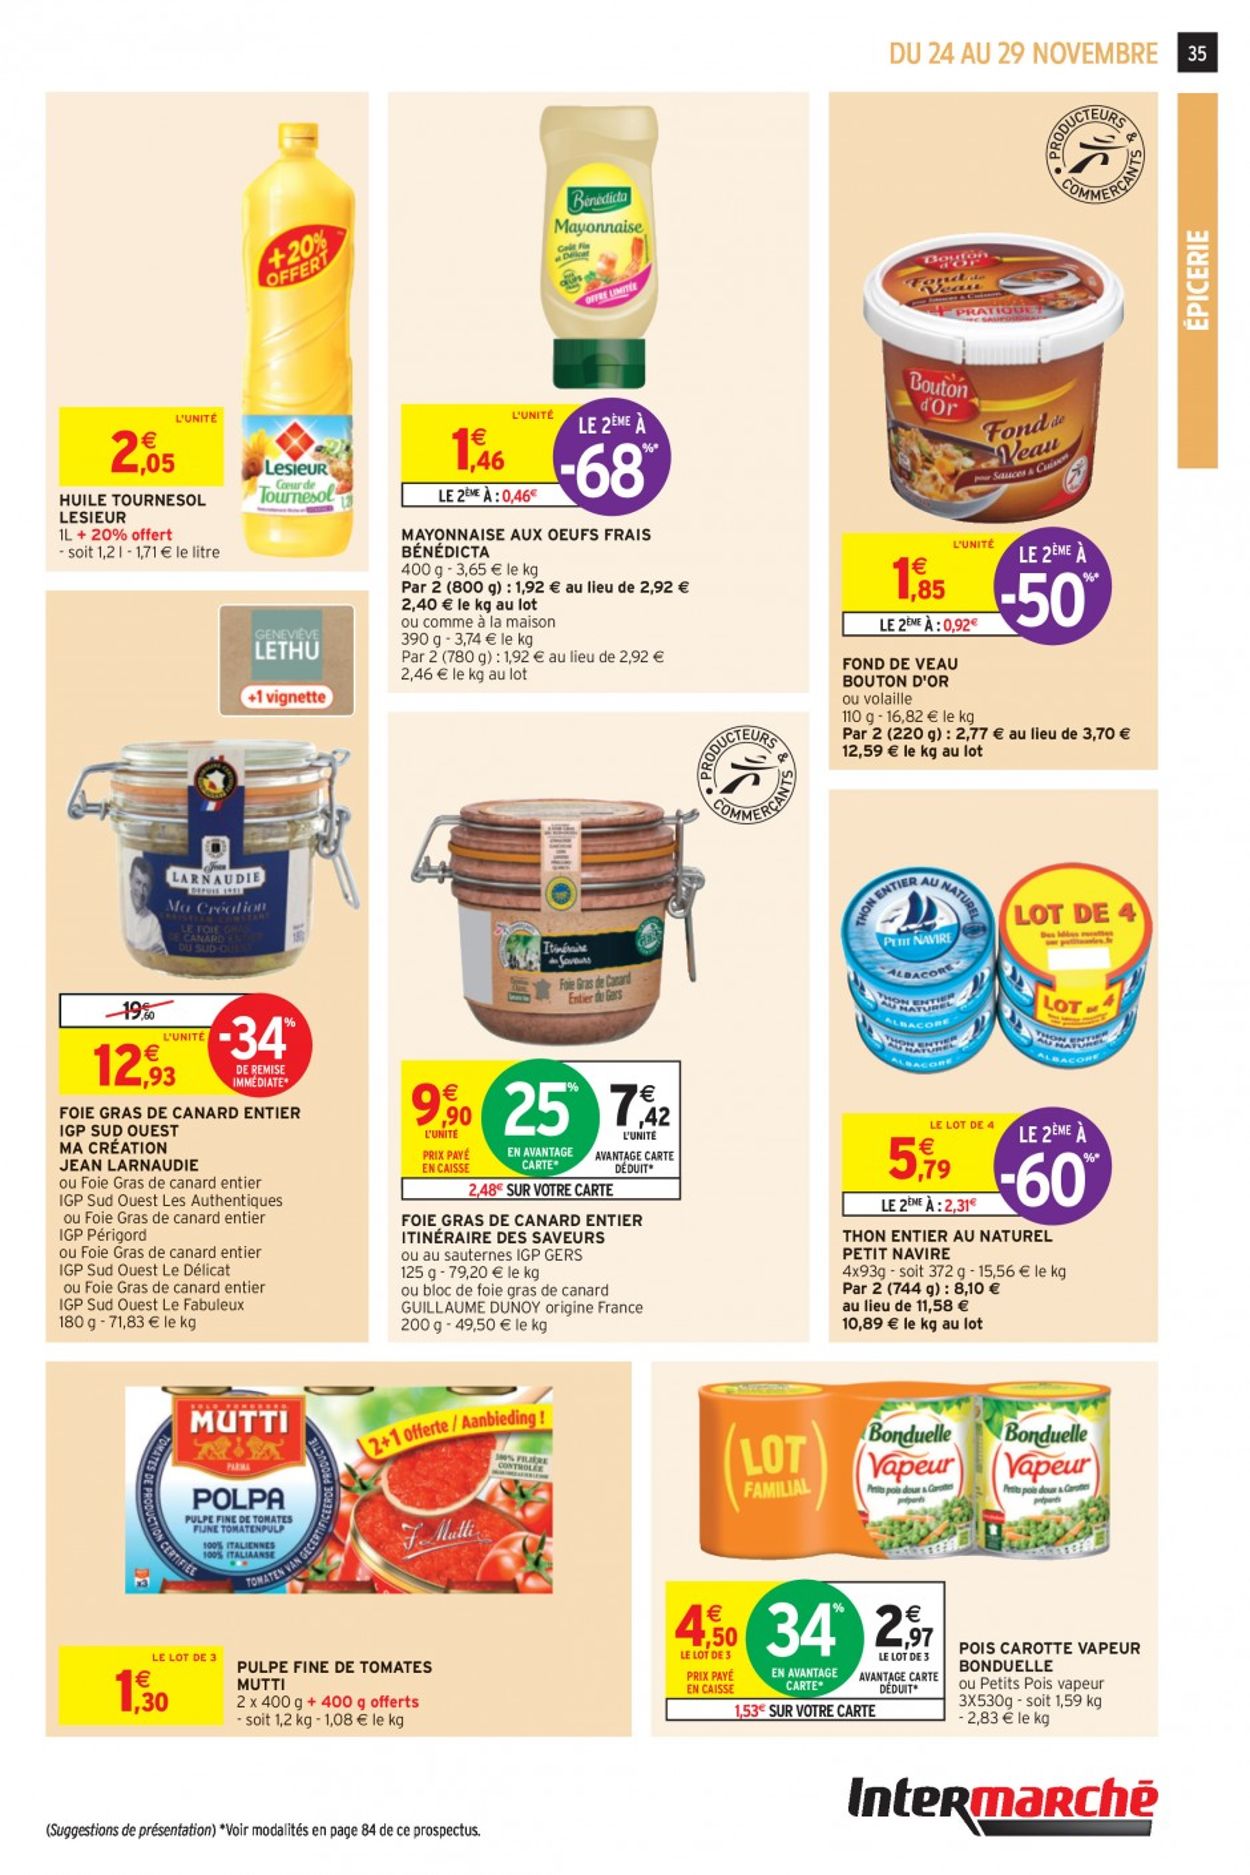 Intermarché Black Friday 2020 Catalogue - 24.11-29.11.2020 (Page 31)